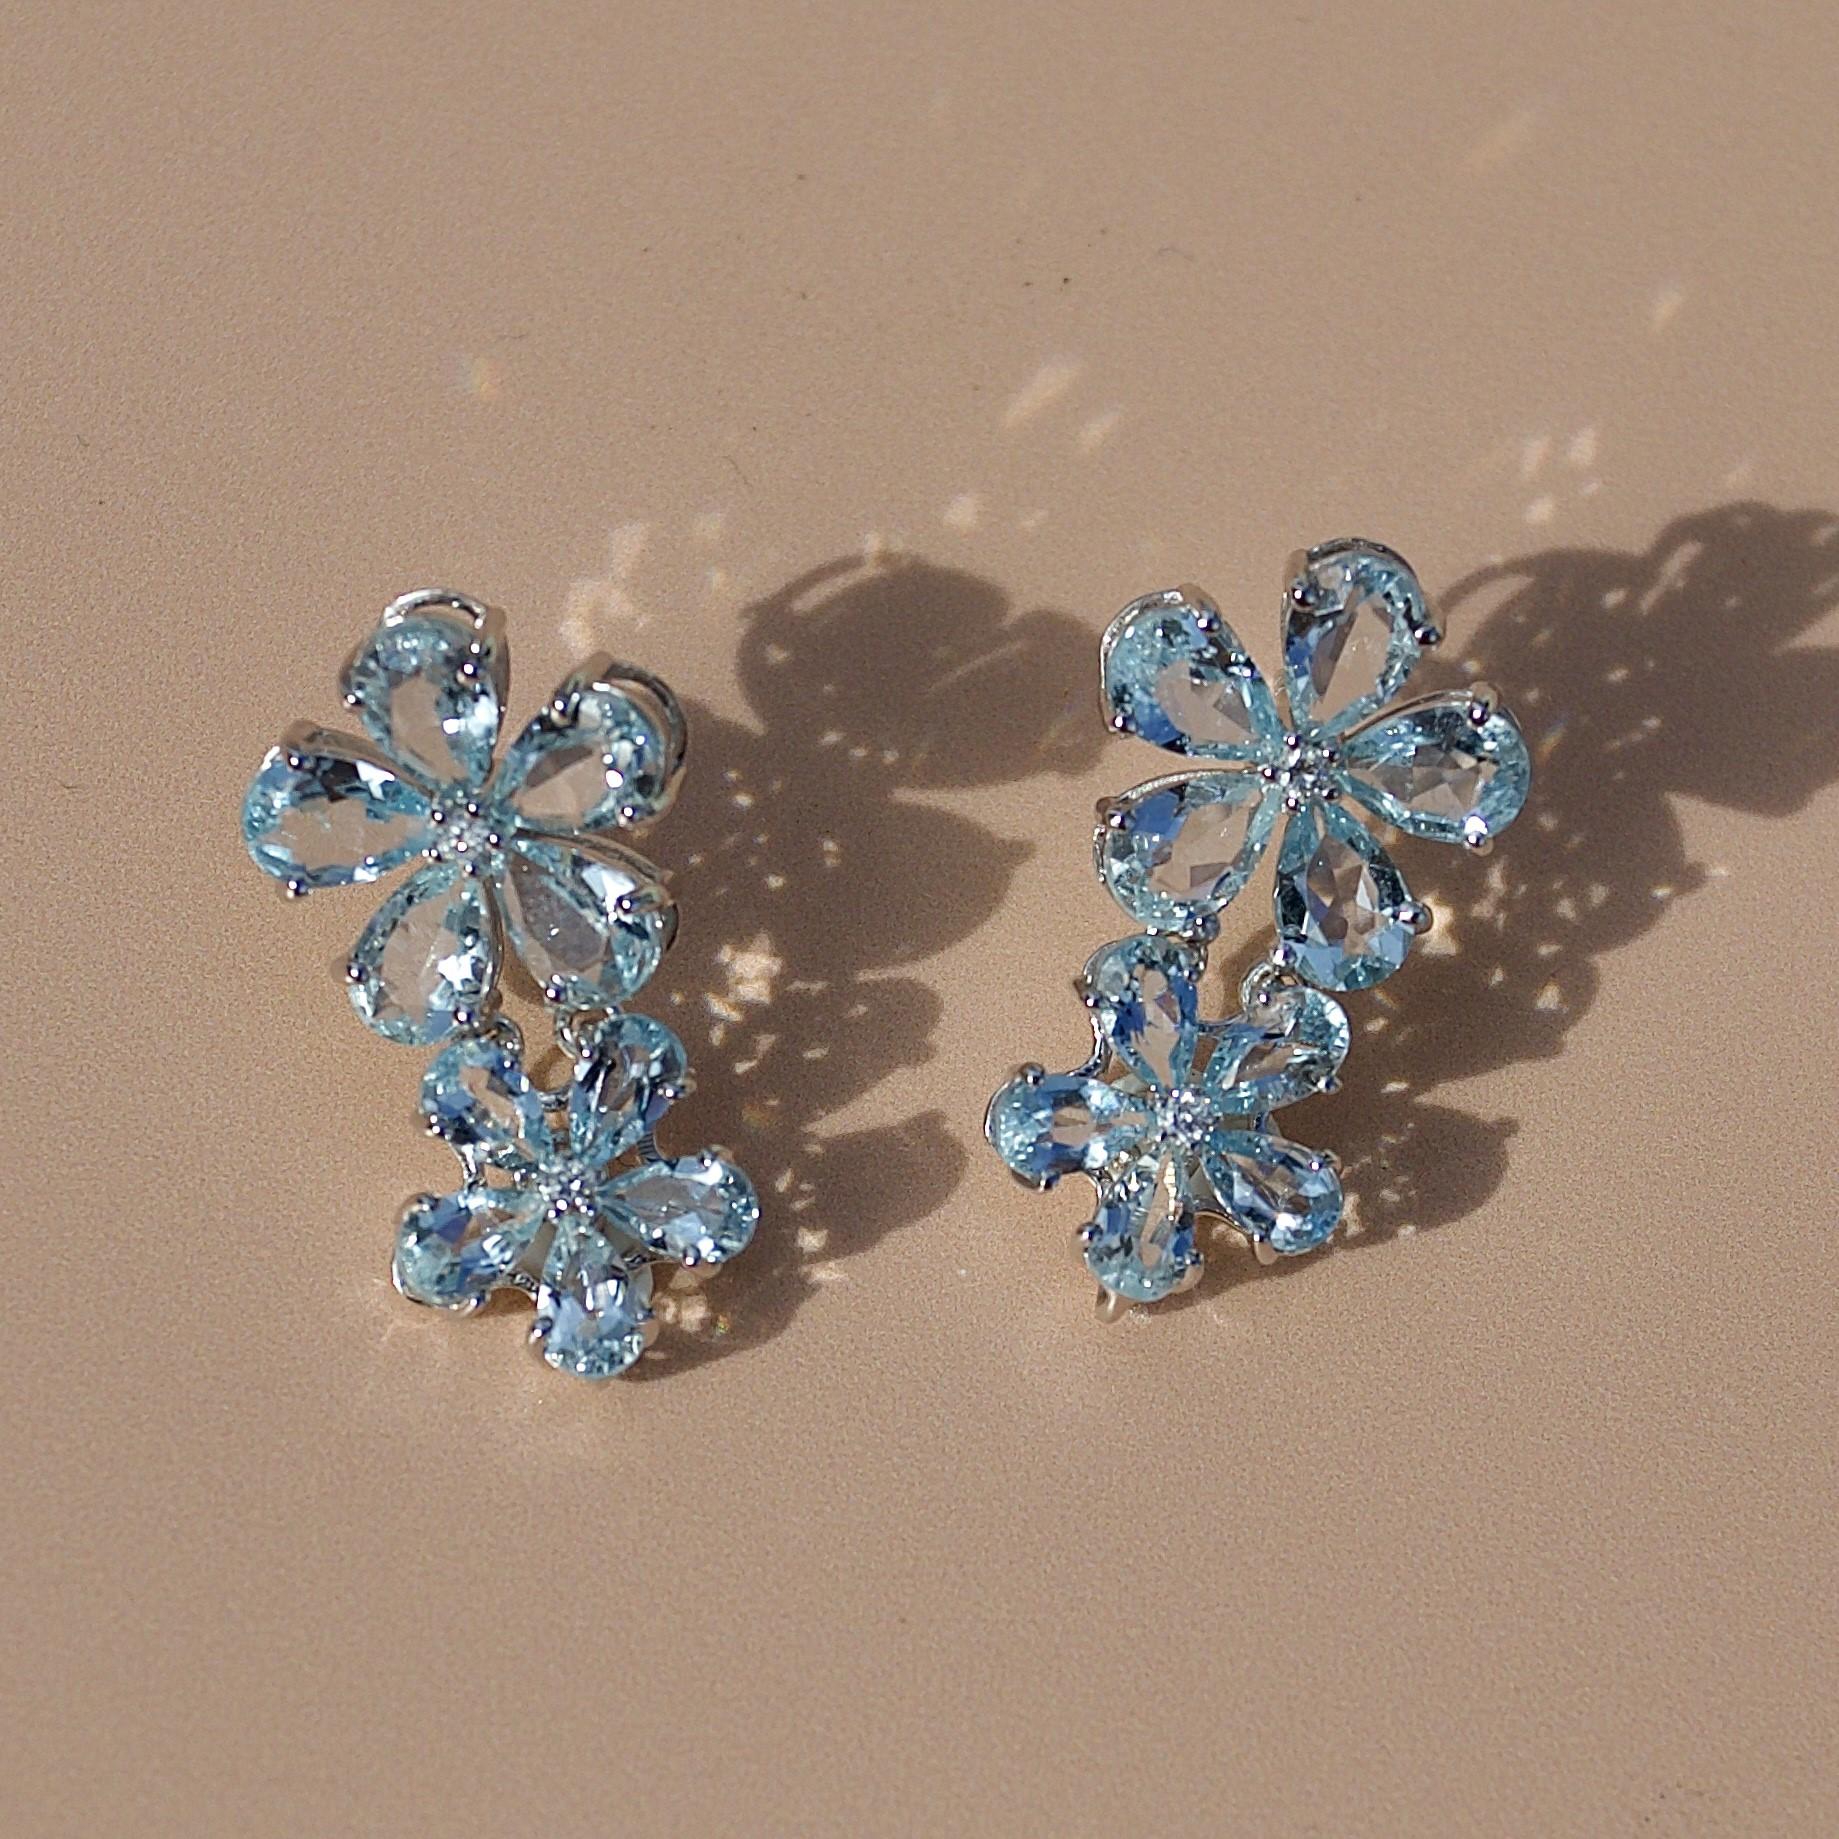 Nina Zhou Aquamarine Diamond Blossom and 12-13mm Pearl Convertible Drop Earrings In New Condition For Sale In Rowland Heights, CA